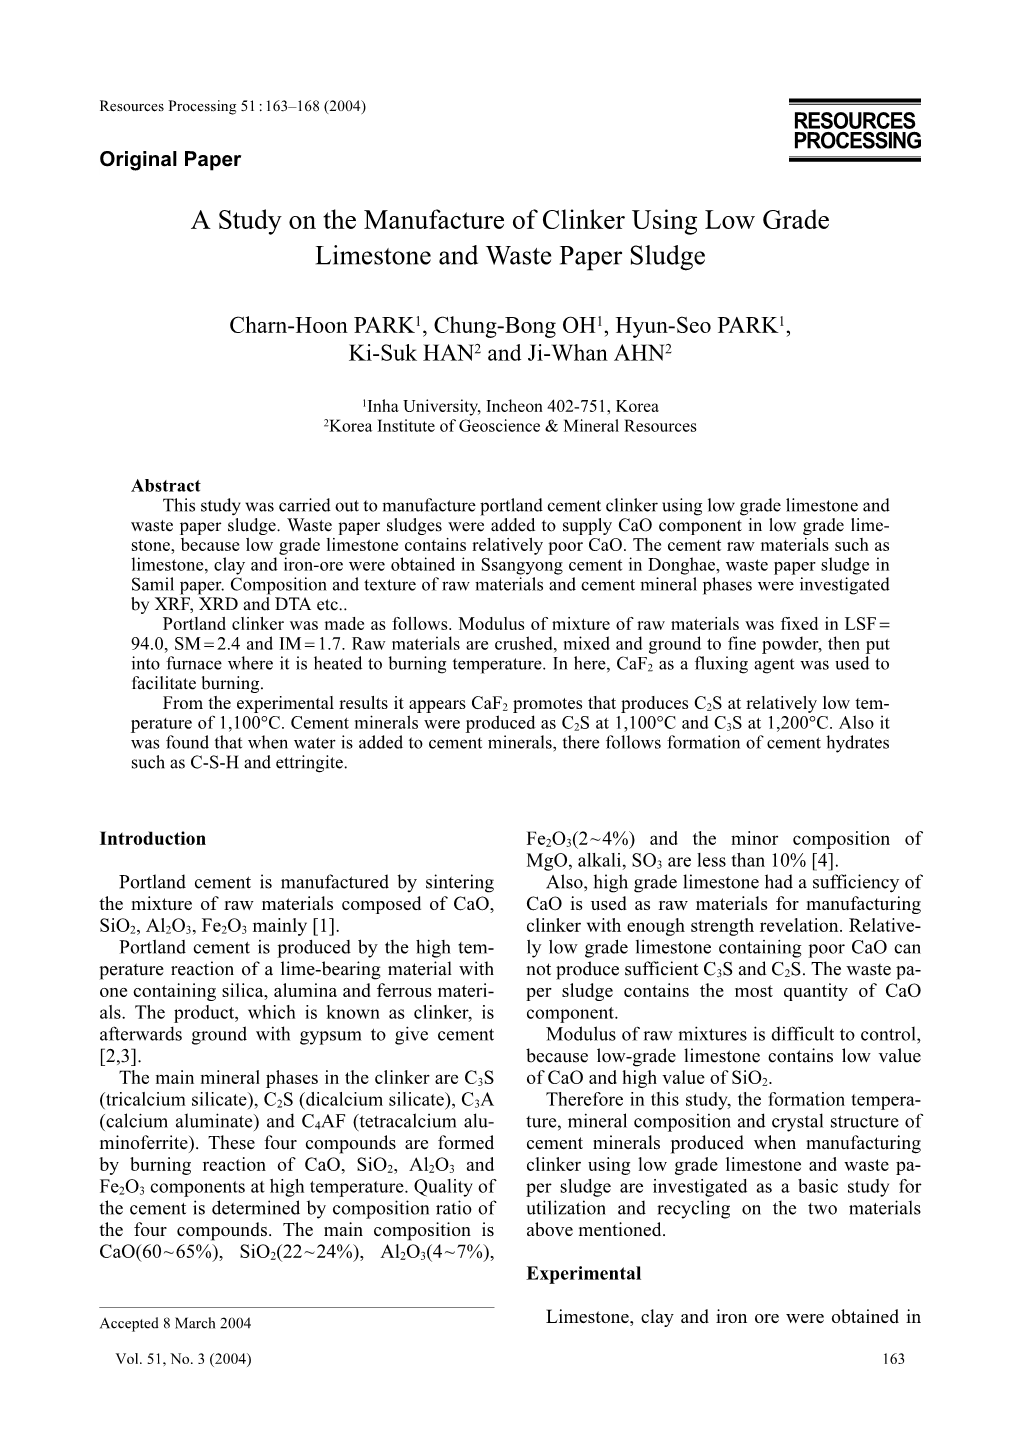 A Study on the Manufacture of Clinker Using Low Grade Limestone and Waste Paper Sludge